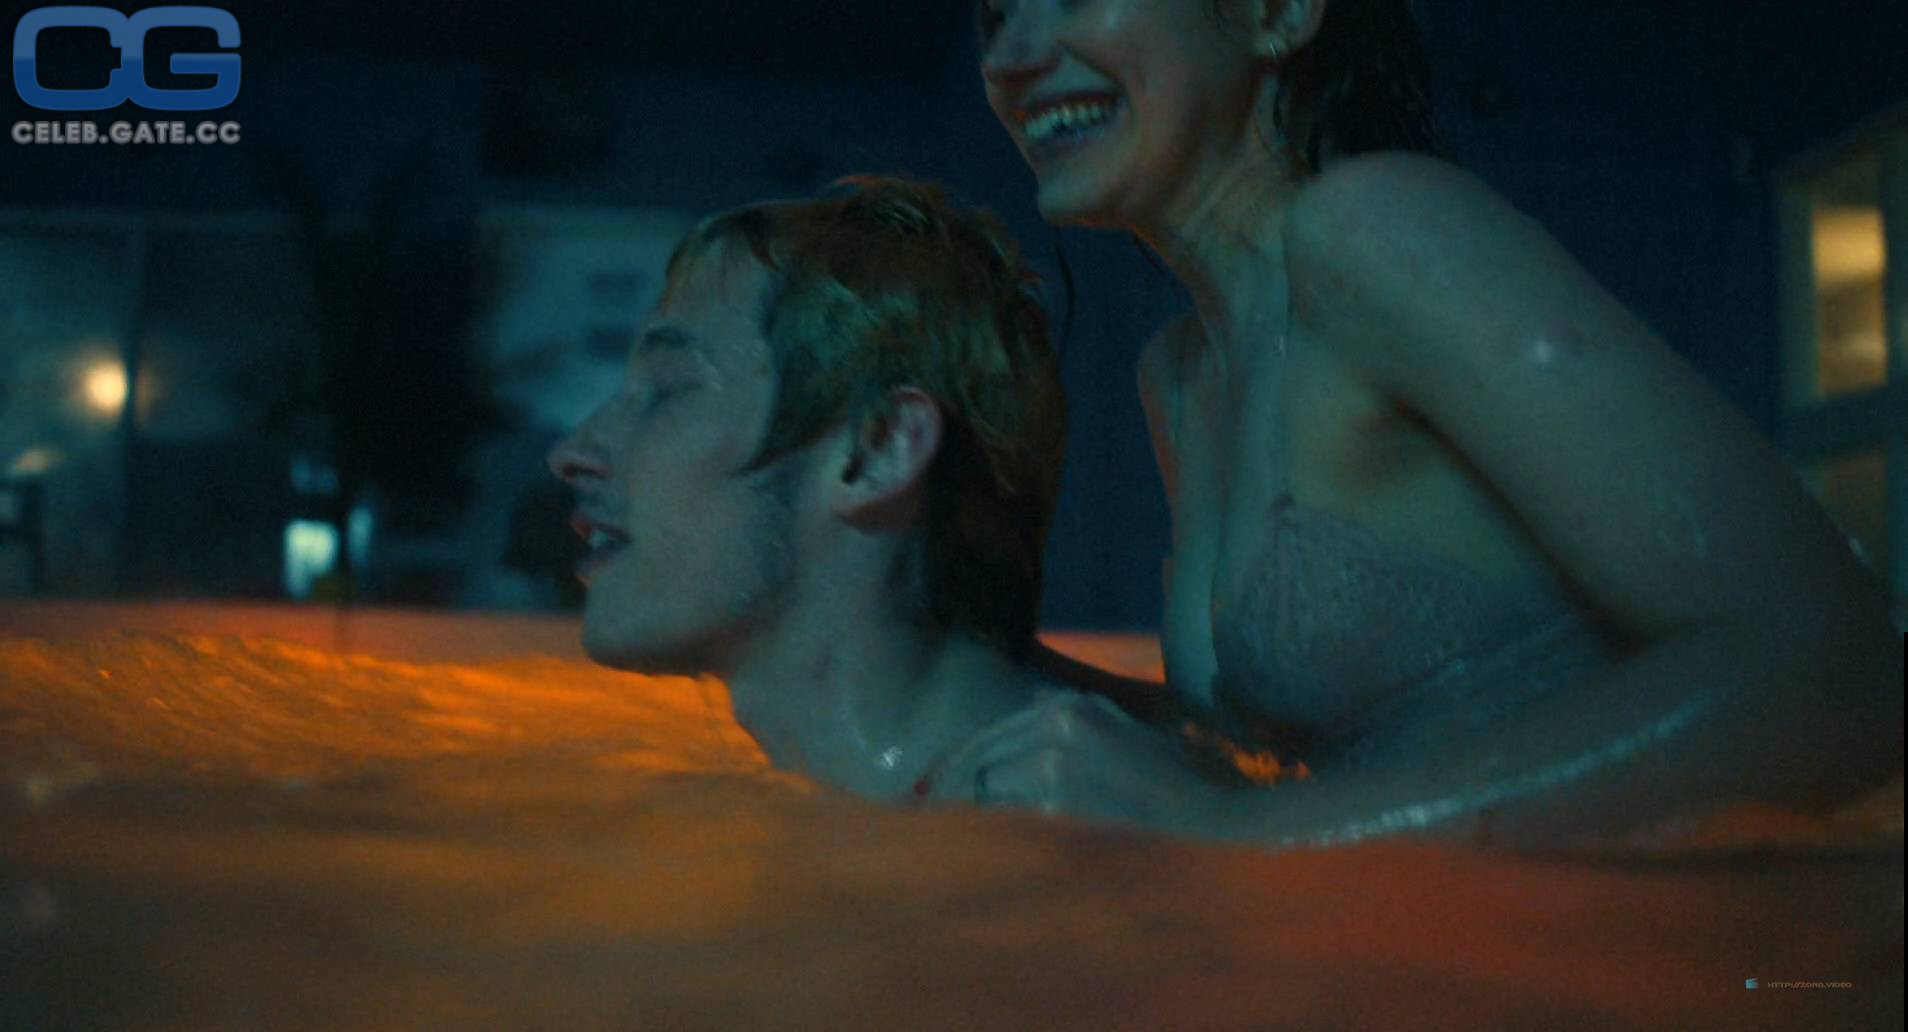 Imogen Poots Fappening